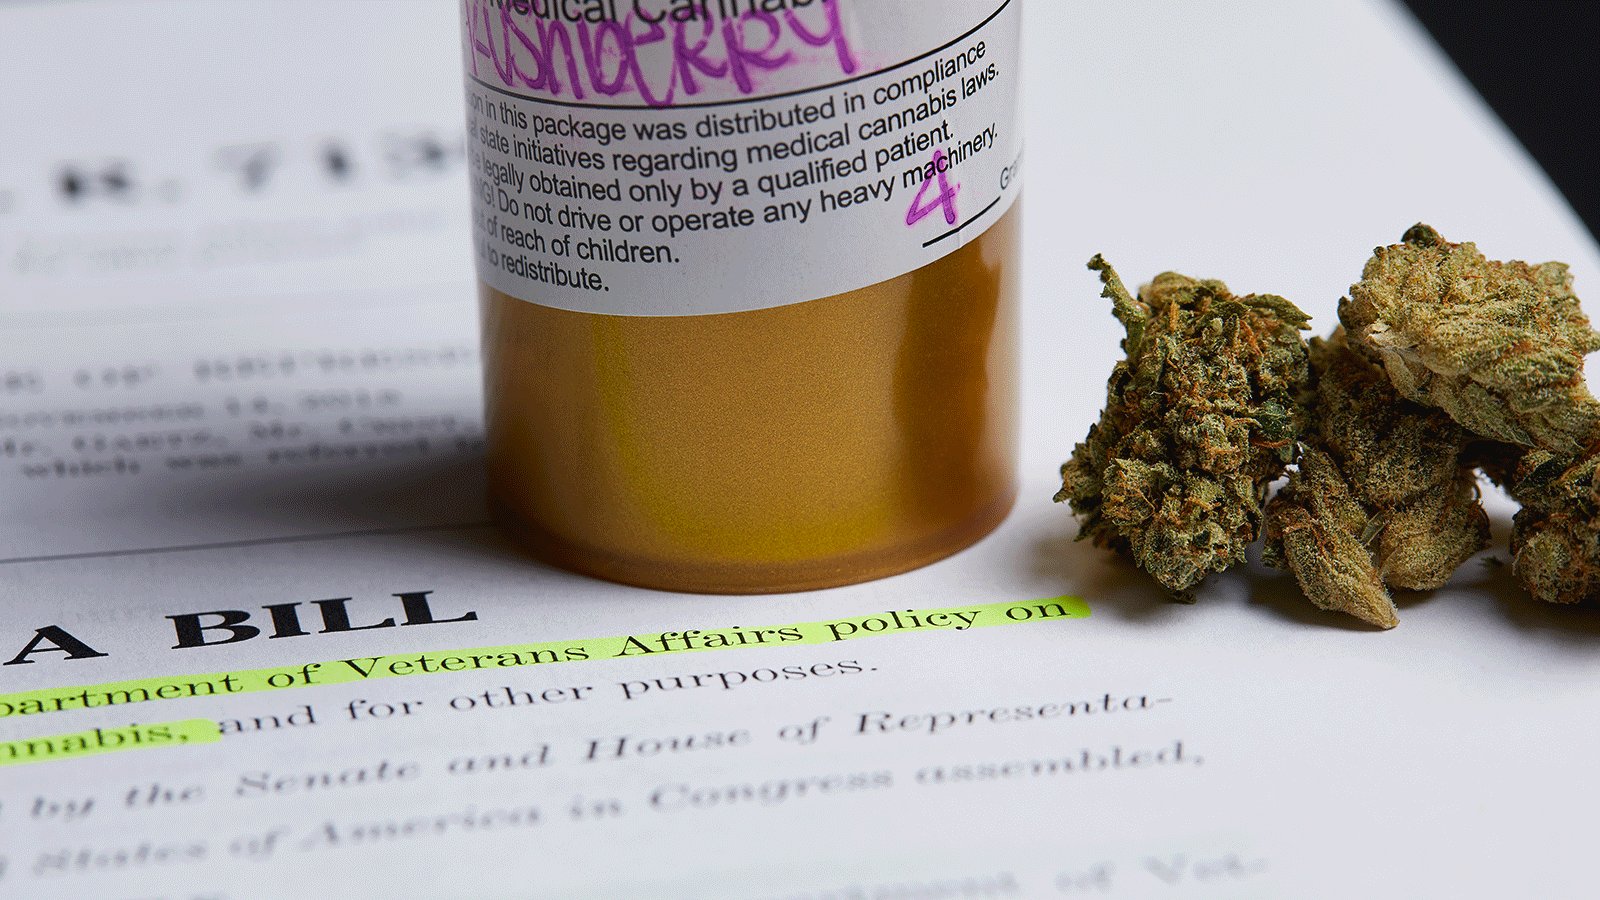 House Bill Would Direct Veterans Affairs to Research Medical Marijuana